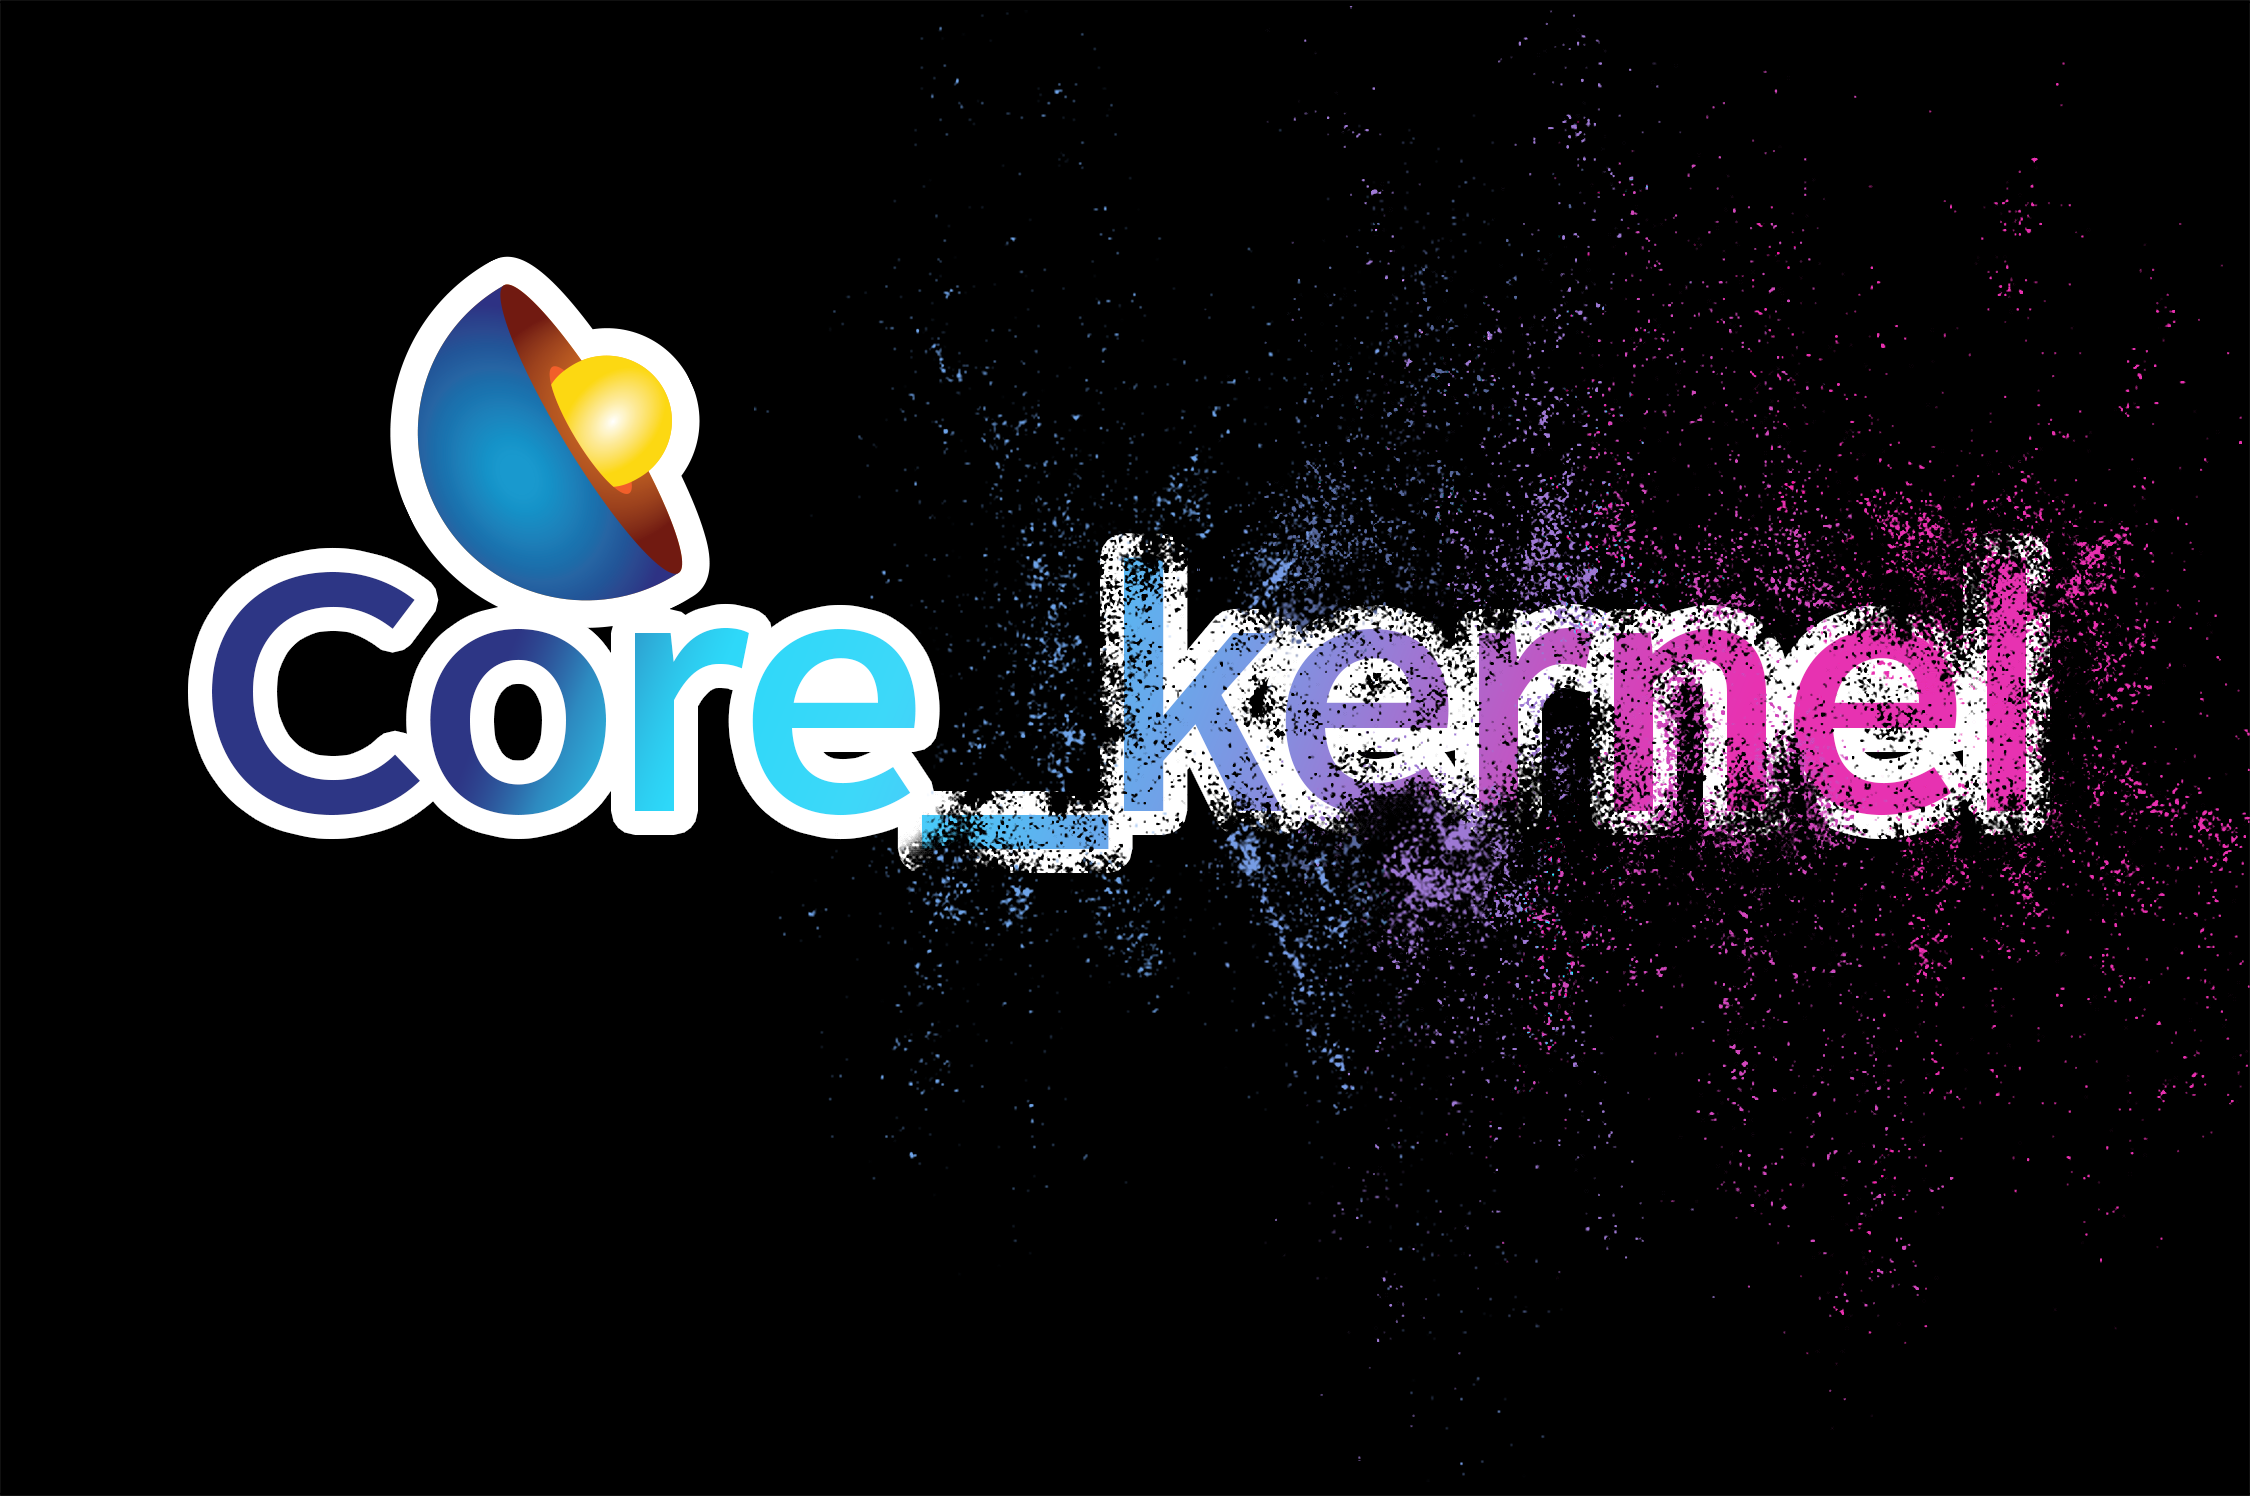 ./core_kernel.png